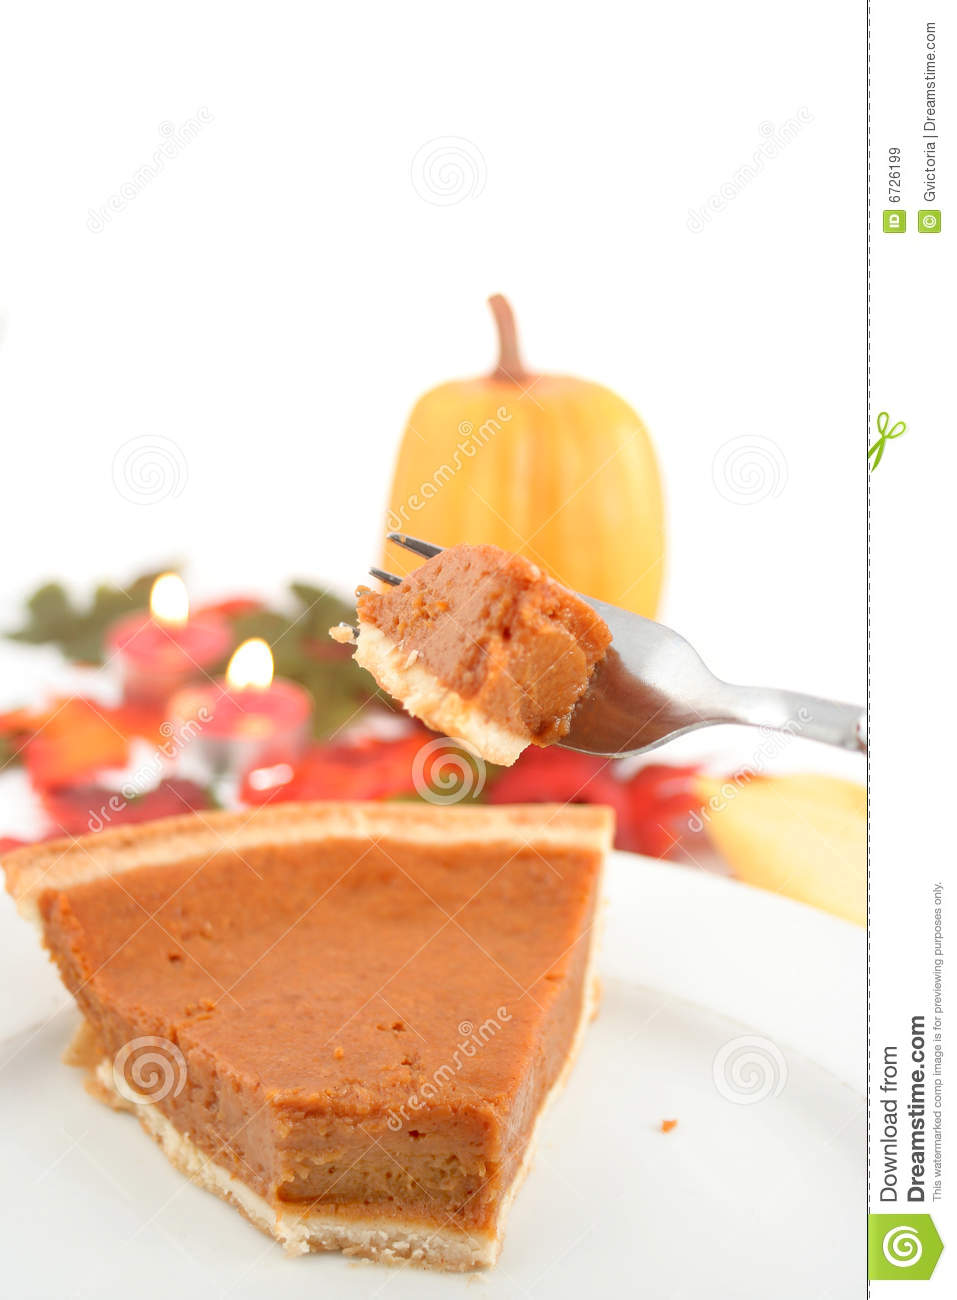 One Piece Of Pumpkin Pie On White Plate Surrounded By Fall Leaves  The